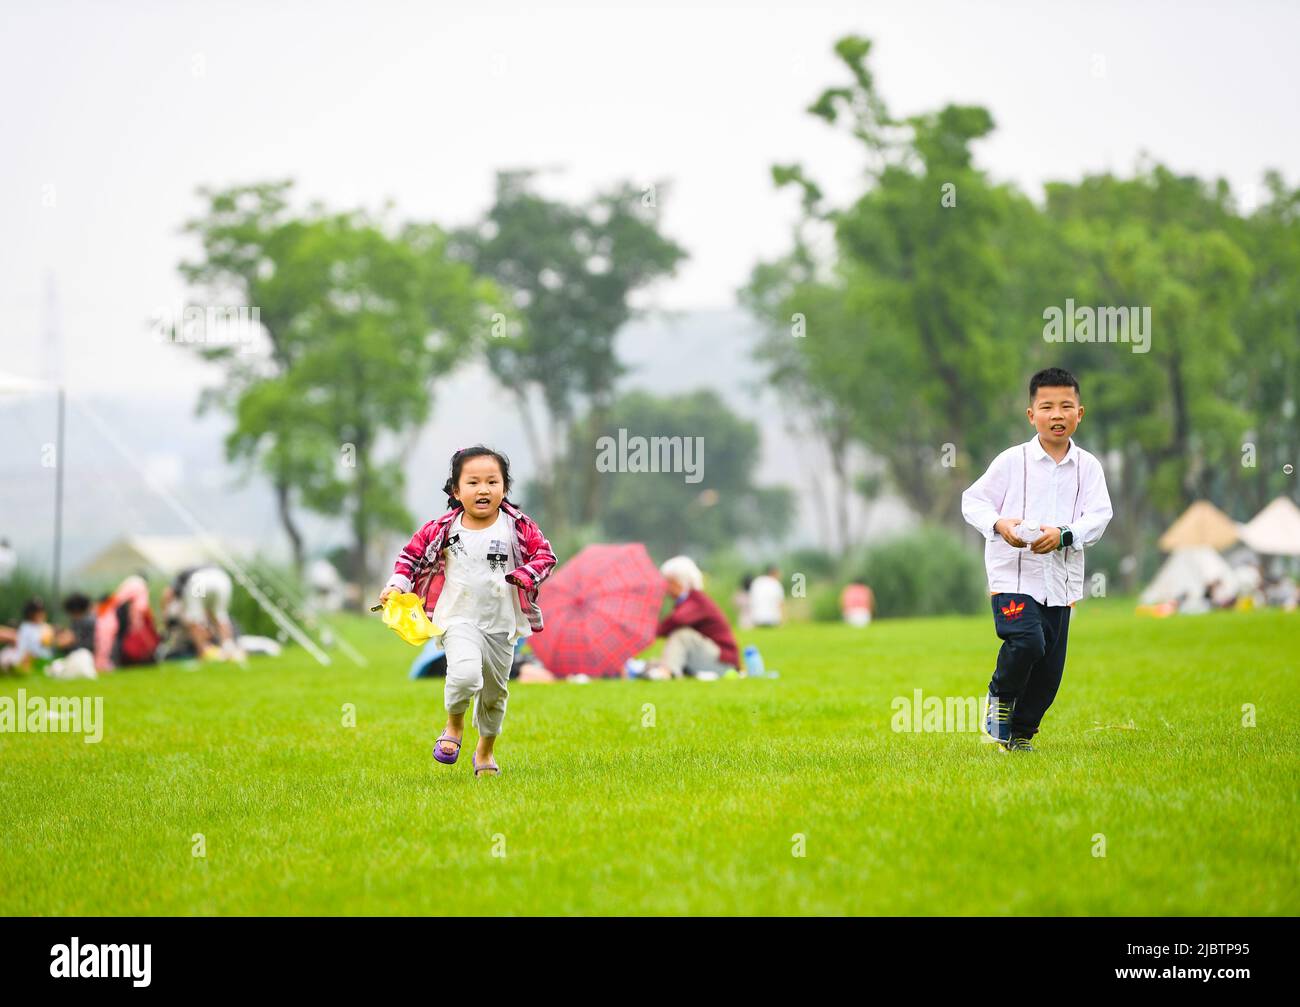 Chongqing. 5th June, 2022. Children have fun in Guangyang Isle in southwest China's Chongqing, June 5, 2022. Guangyang Isle, the largest island on the upper Yangtze River, is rich in natural resources. In recent years, a series of measures have been taken to restore the island's ecological environment, attracting tourists to its colorful fields. Credit: Wang Quanchao/Xinhua/Alamy Live News Stock Photo